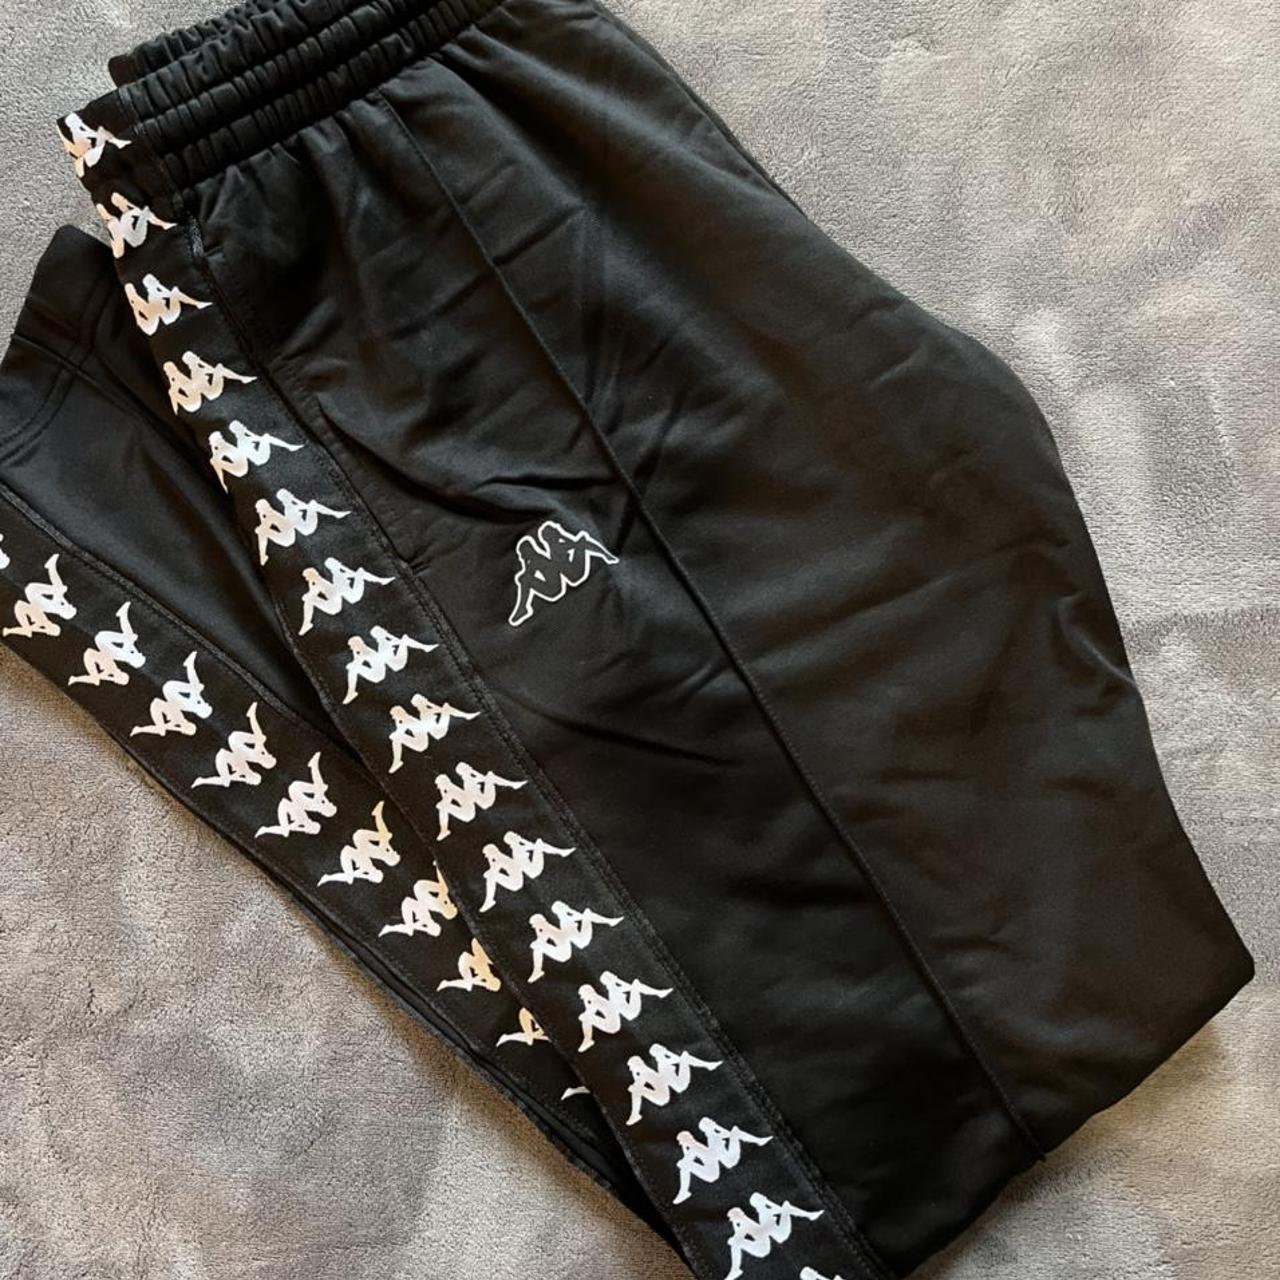 Kappa Men's Black and White Joggers-tracksuits | Depop